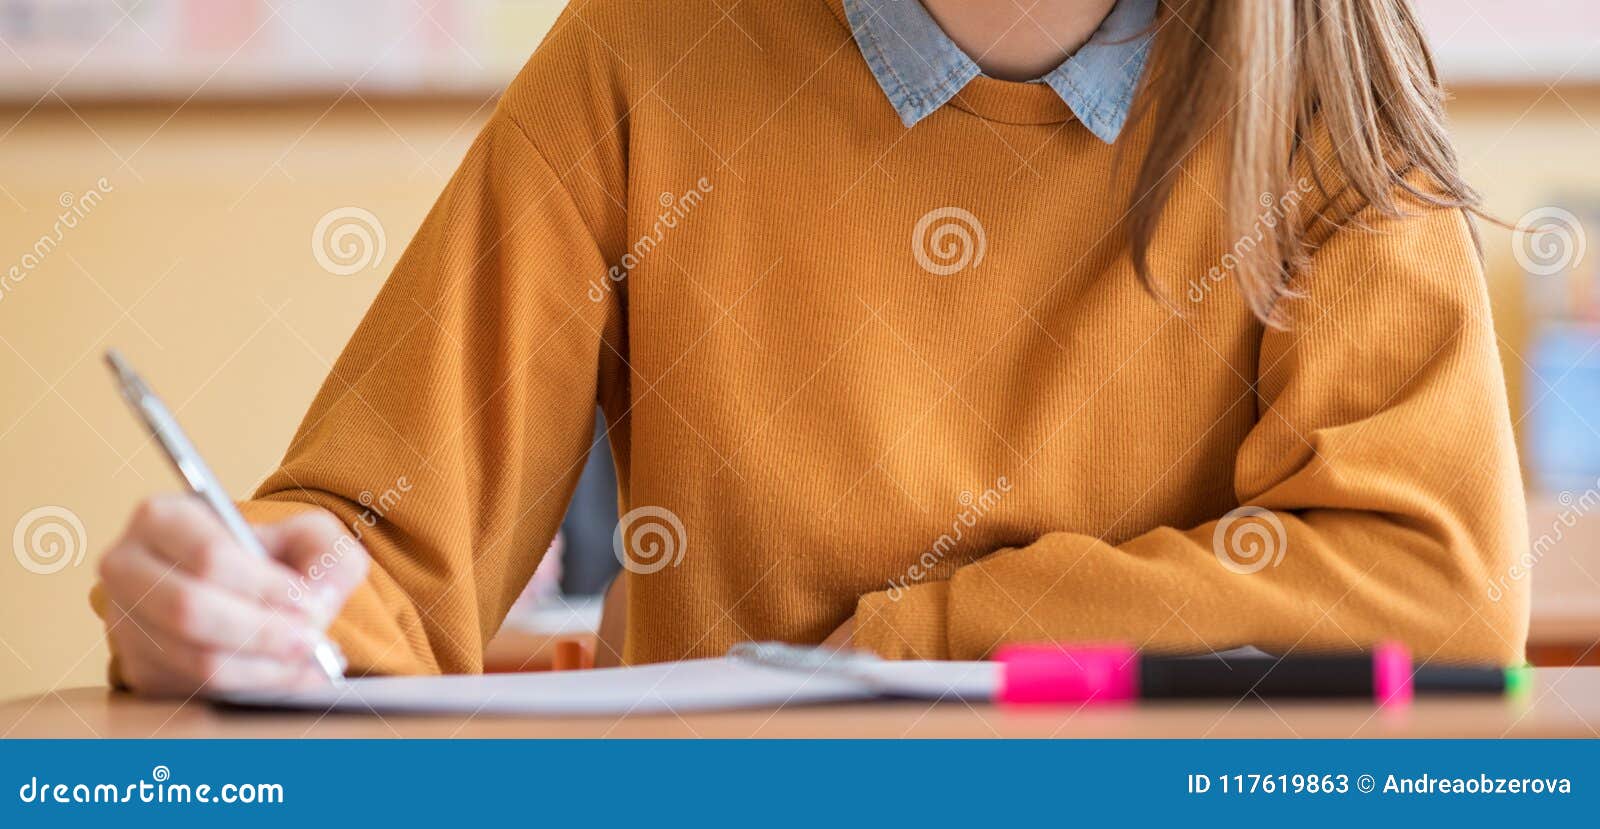 students taking exam in classroom. education test, exams concept. web banner.